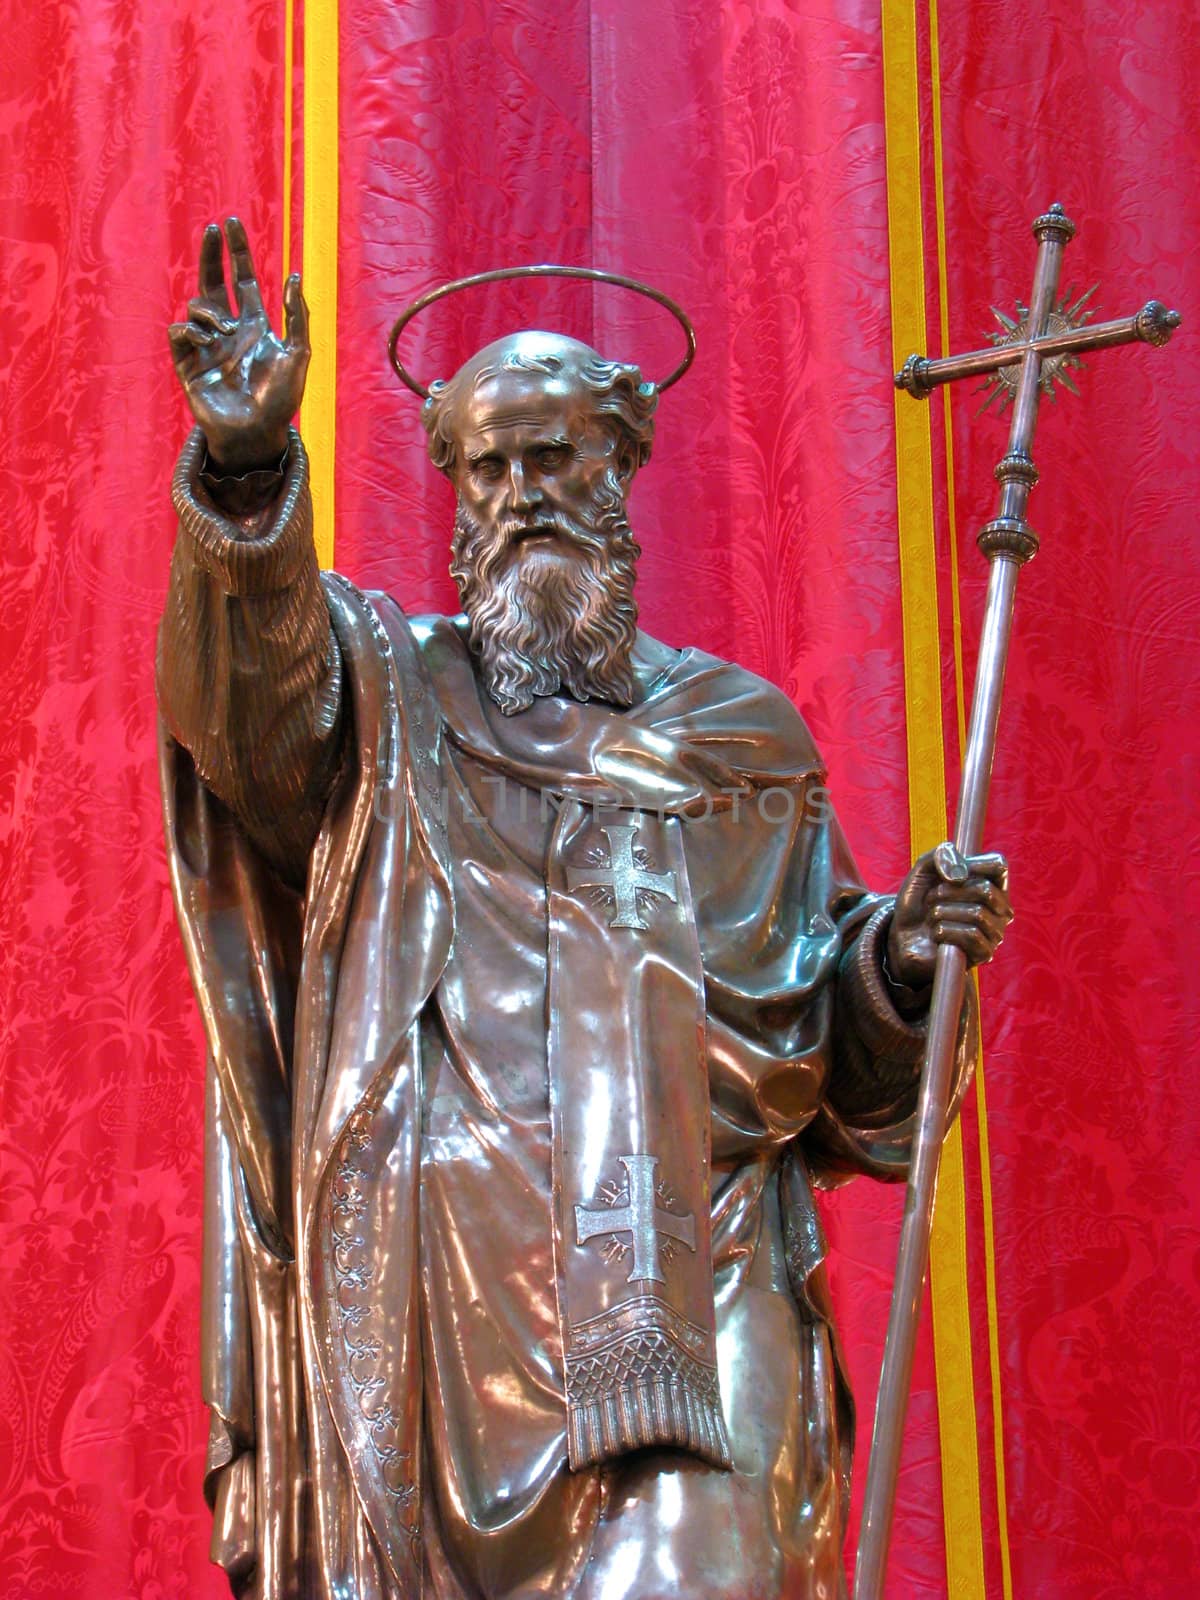 A detail of the silver statue of Saint Philip in Zebbug, Malta.